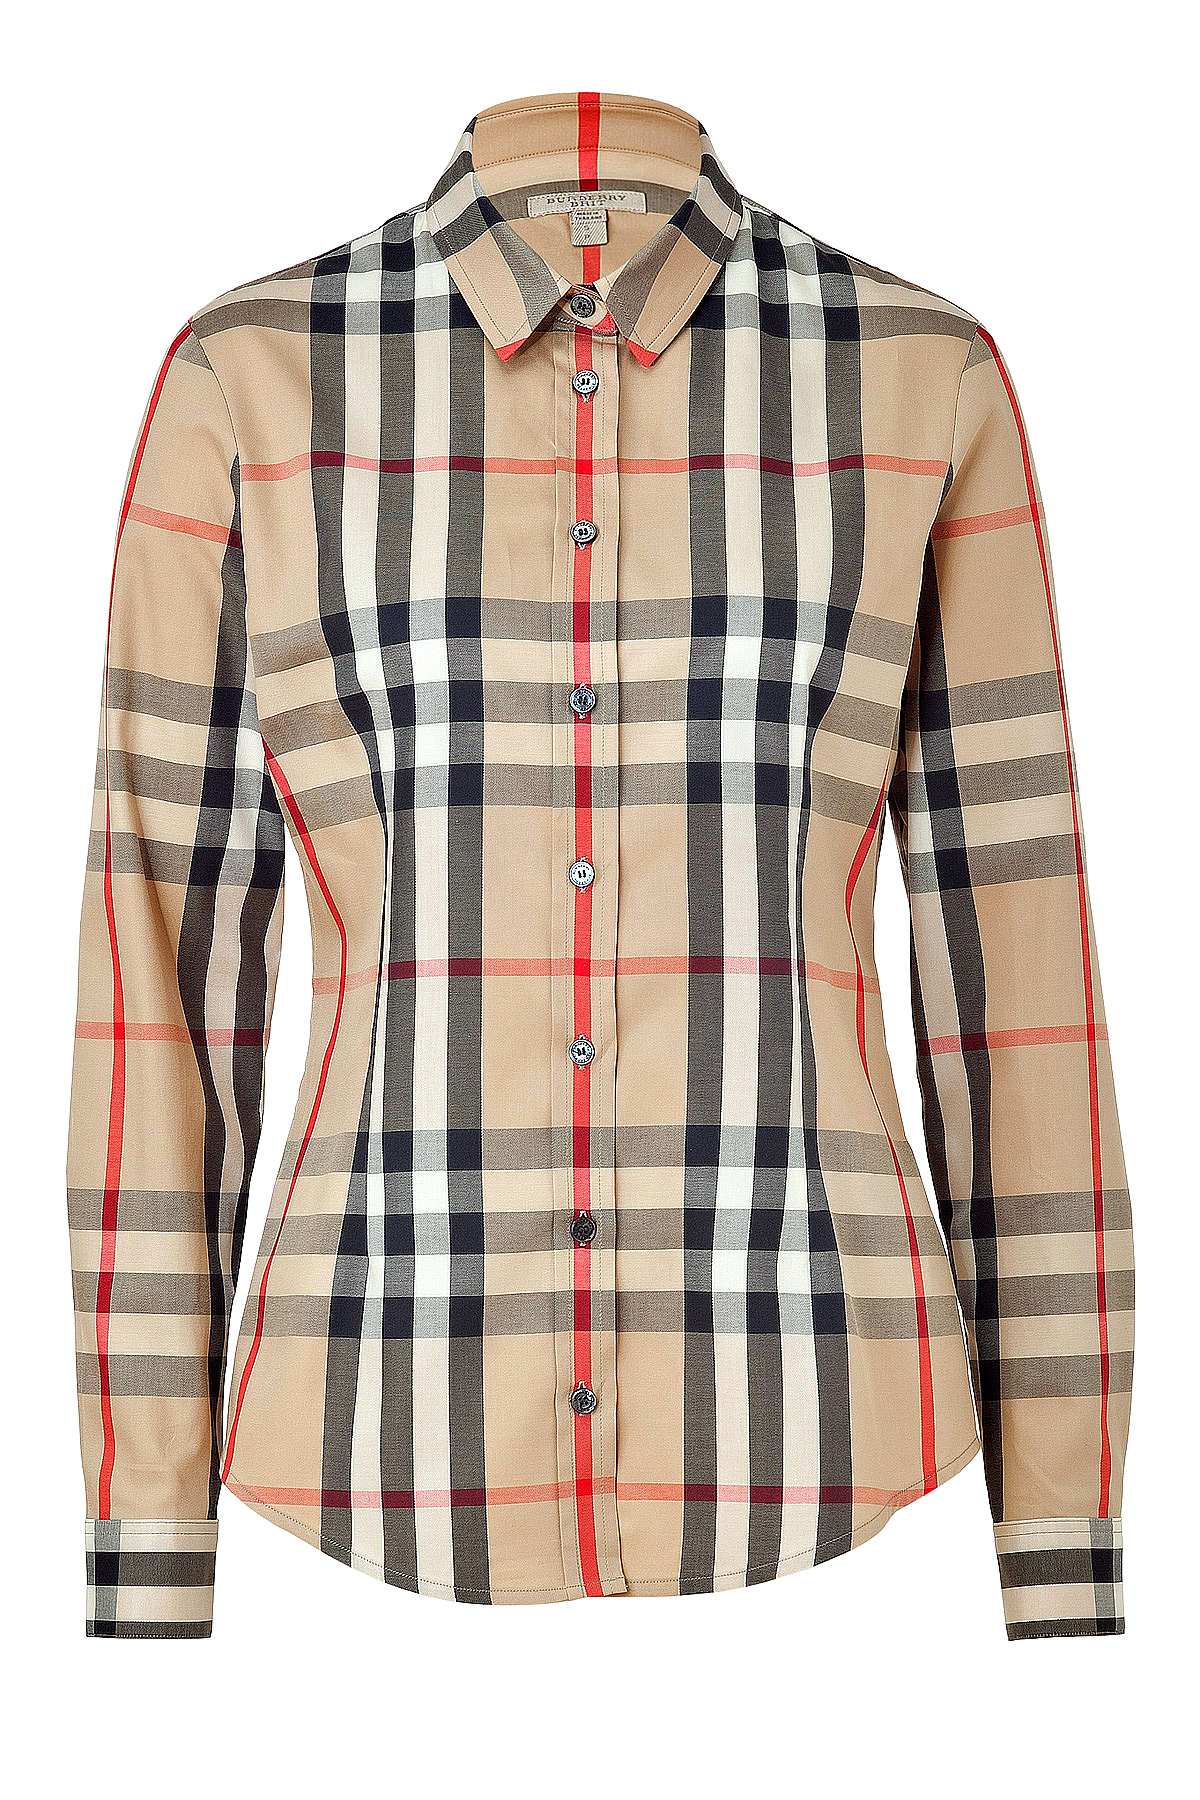 Lyst - Burberry brit New Classic Check Cotton Stretch Shirt in Brown